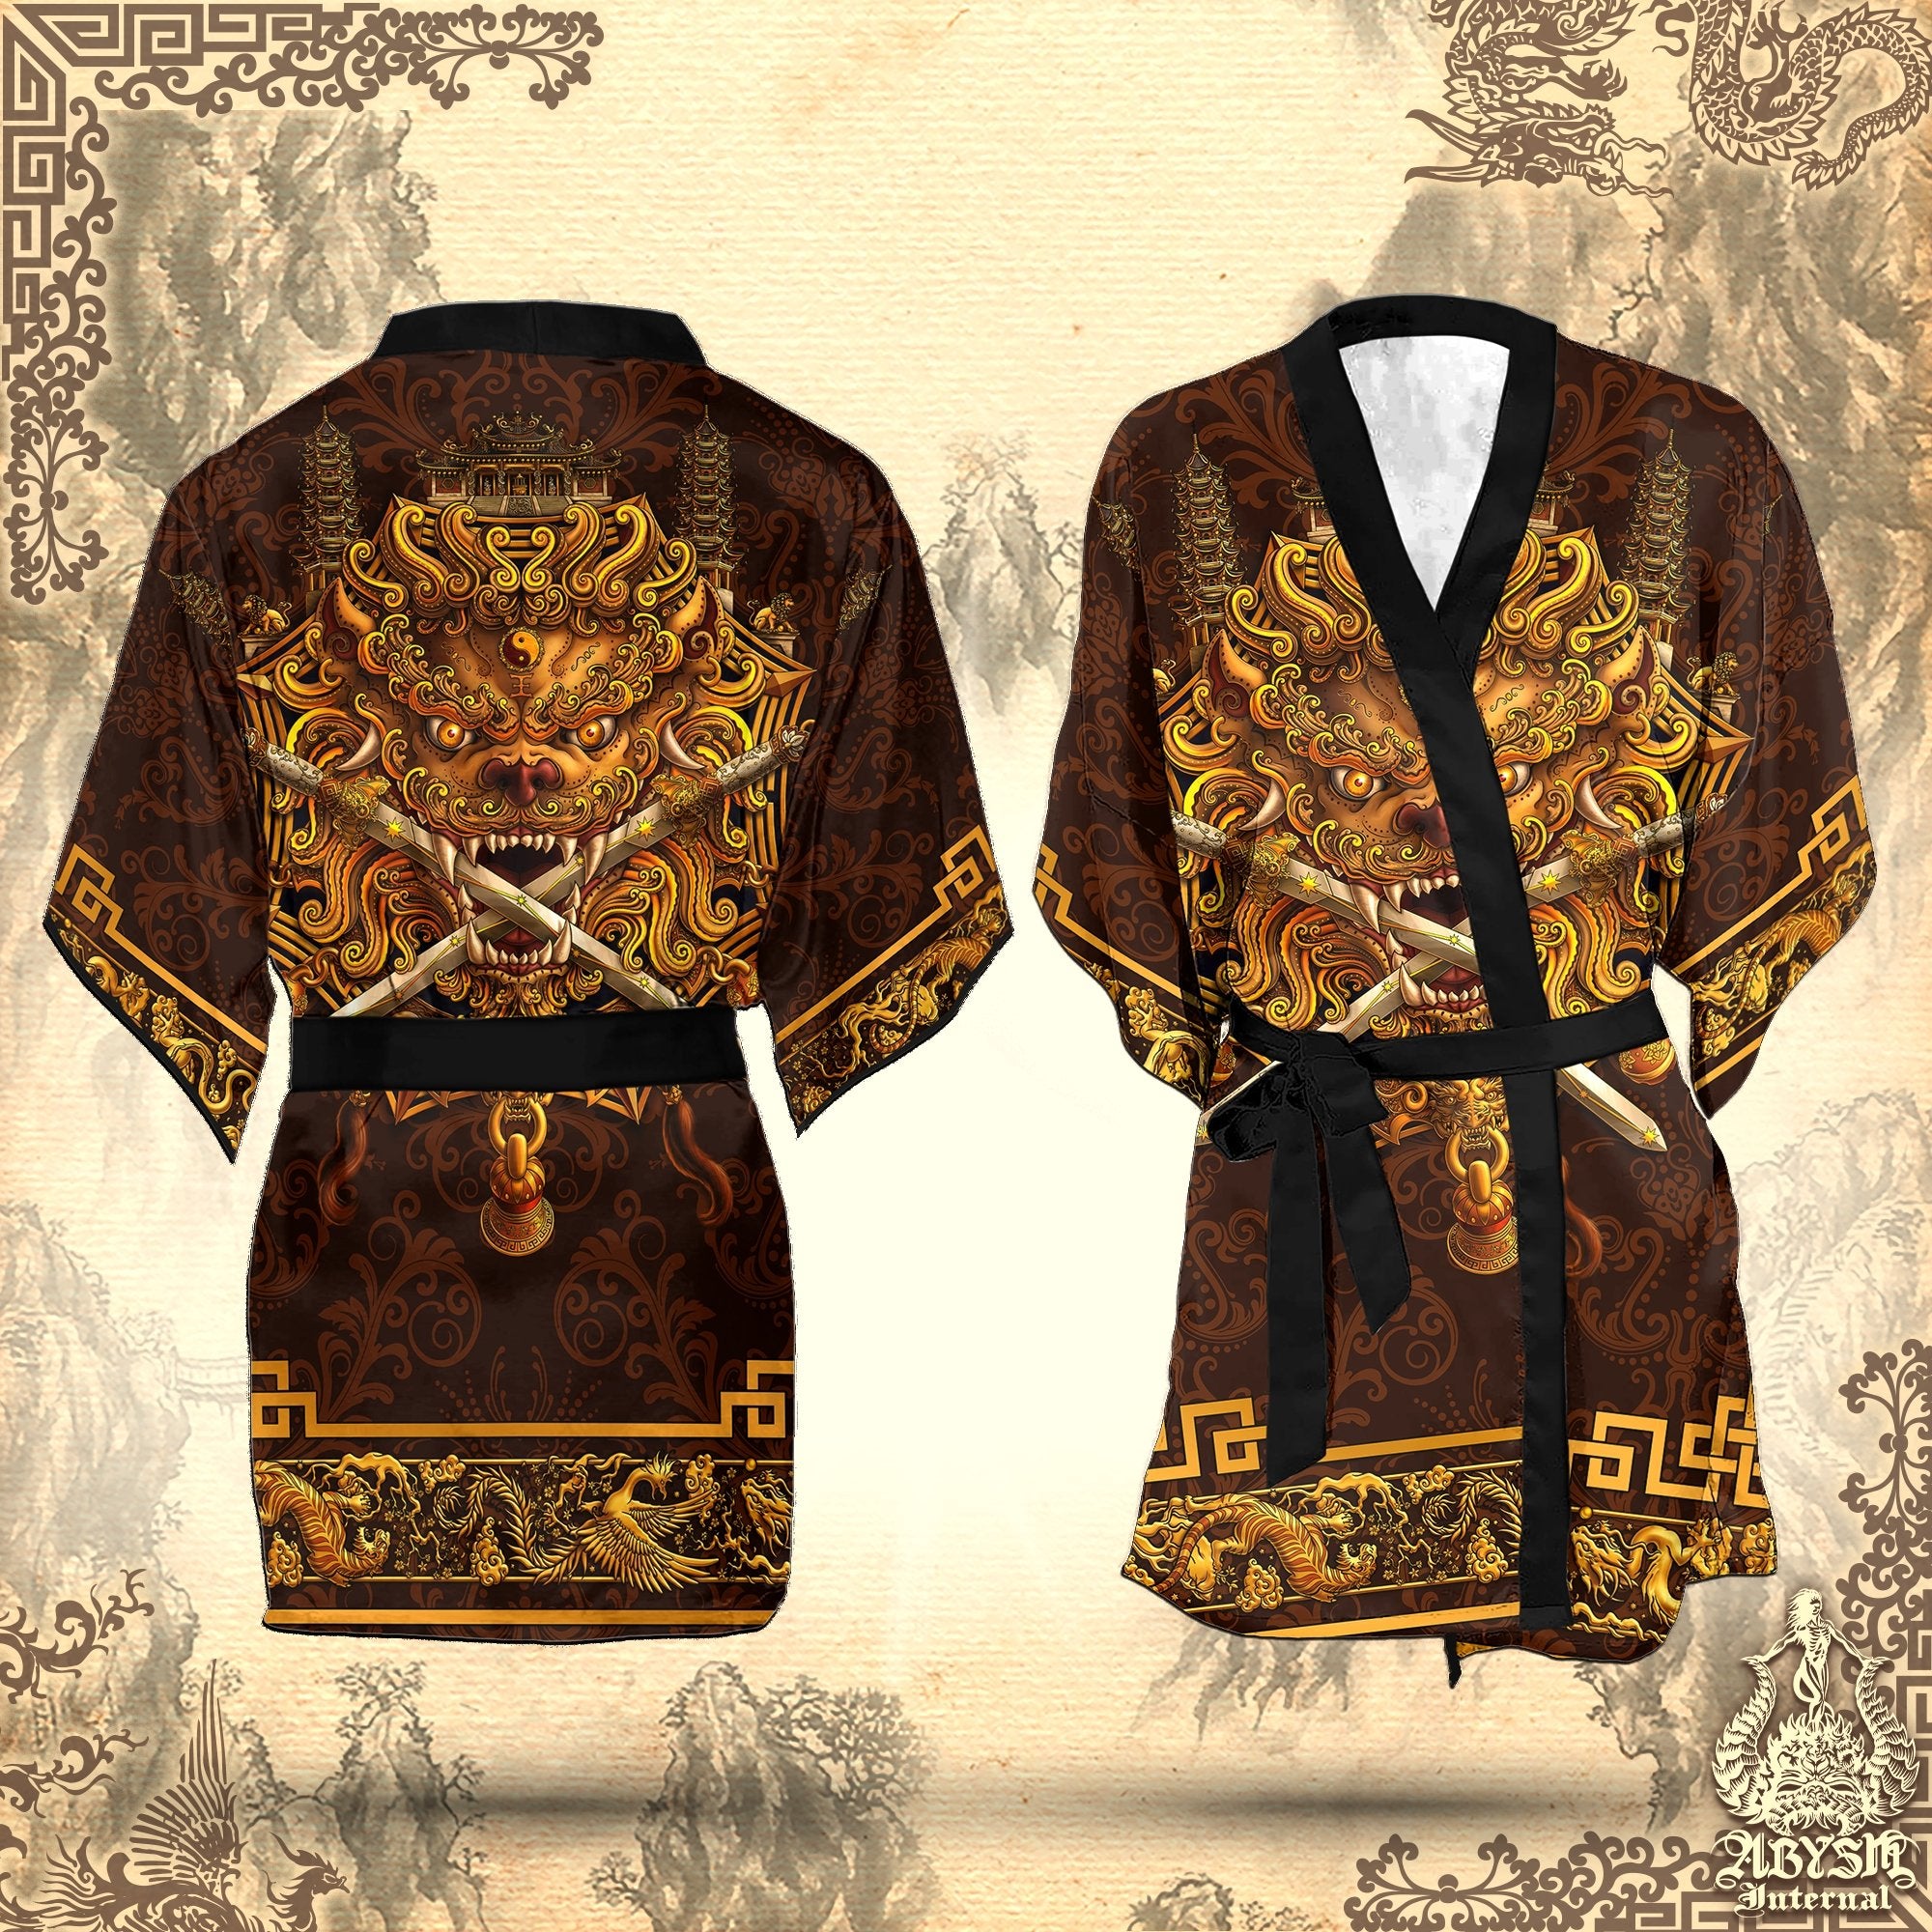 Sword Lion Cover Up, Beach Outfit, Chinese Party Kimono, Taiwan Summer Festival Robe, Asian Indie and Alternative Clothing, Unisex - Gold - Abysm Internal